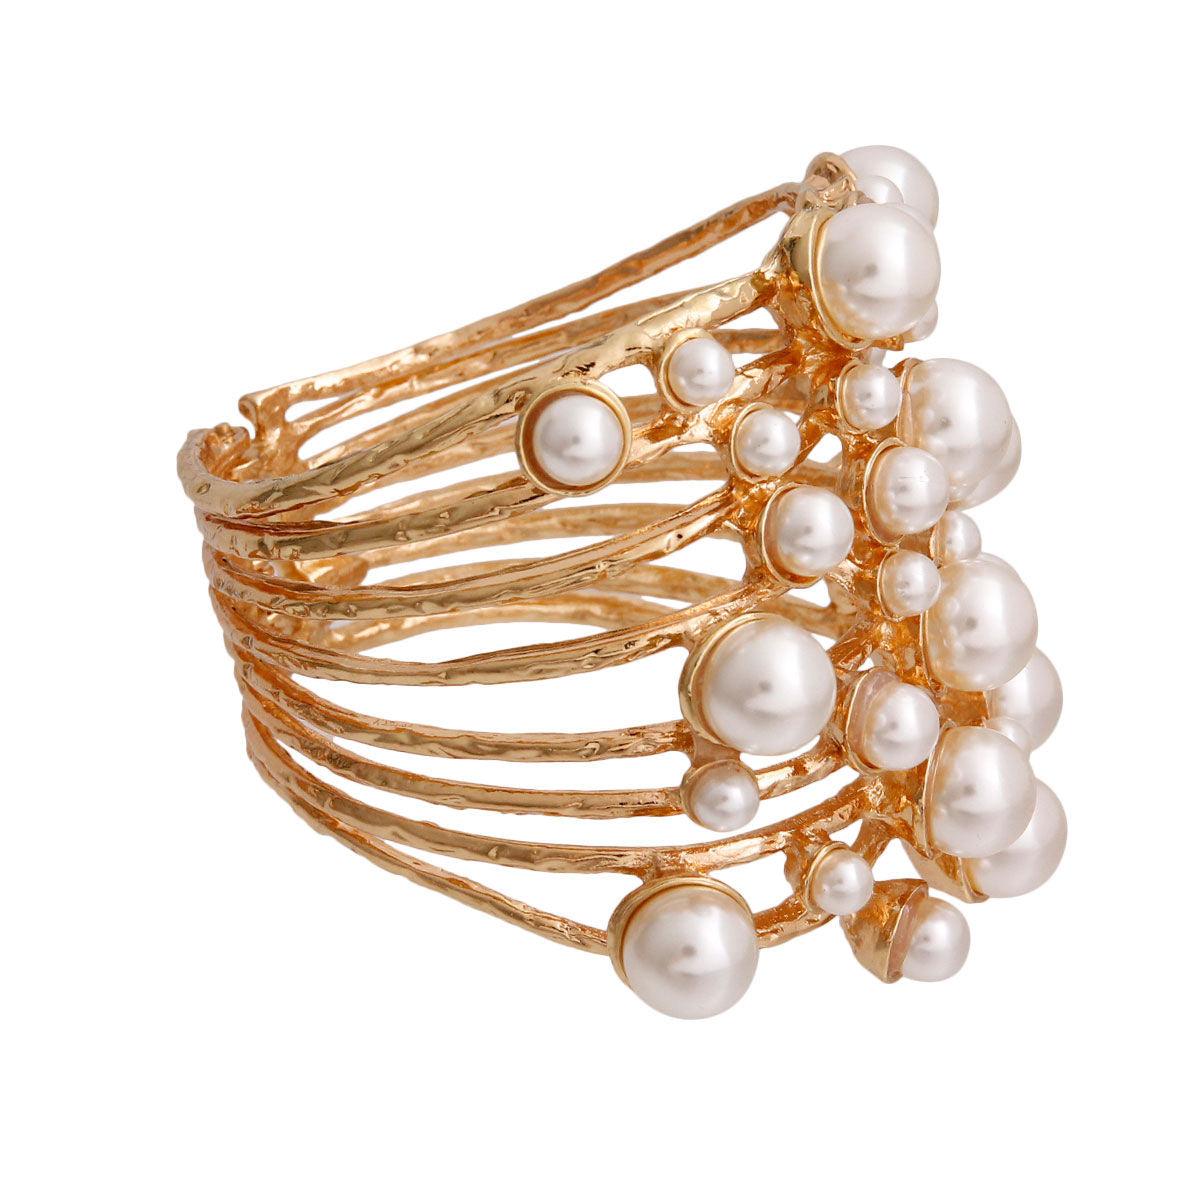 Statement Bracelet with Stunning Faux Pearl Open Work Design